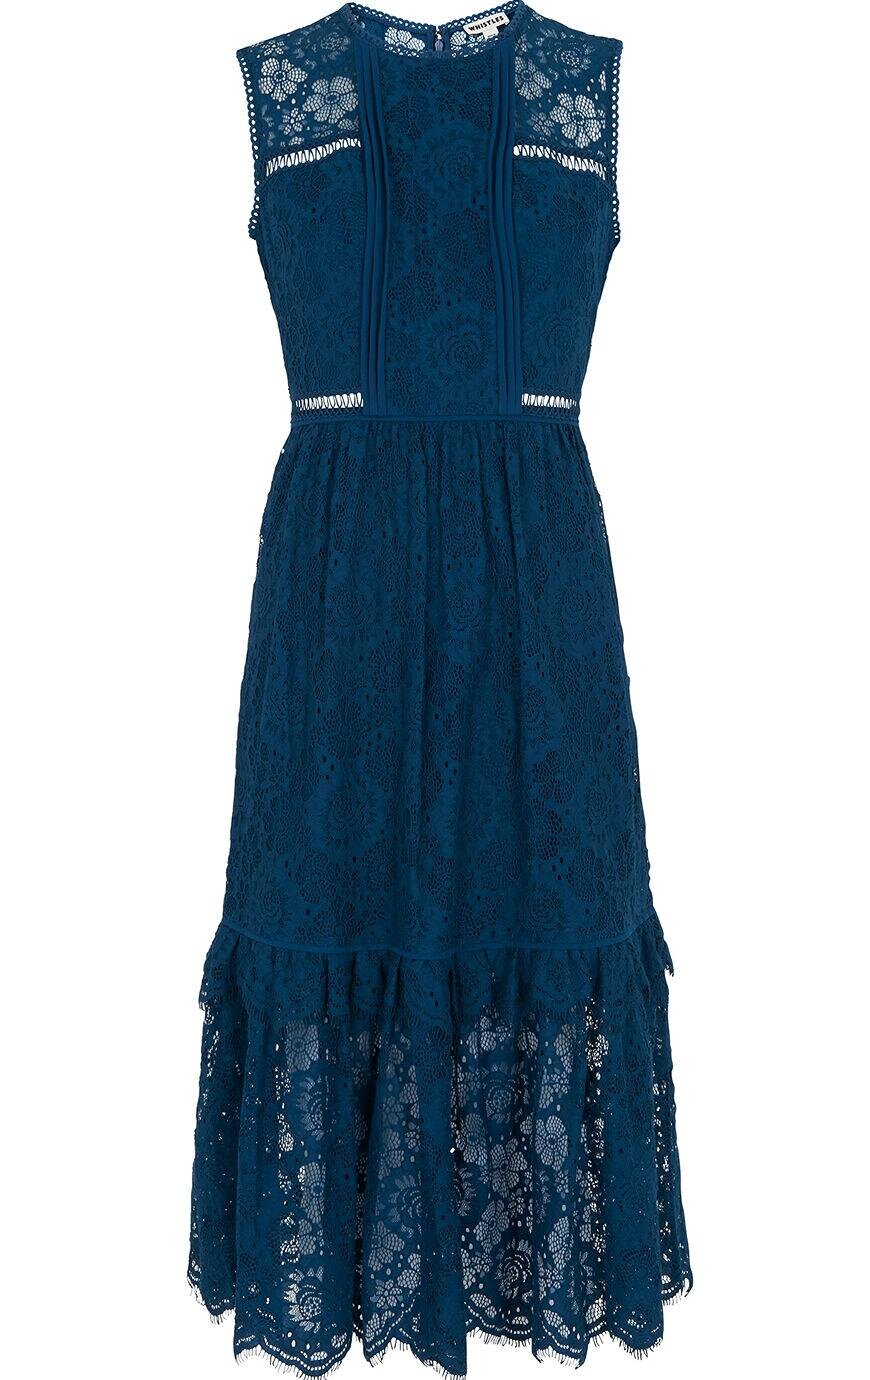 Whistles Rosie Lace Panel Dress in Blue.jpg